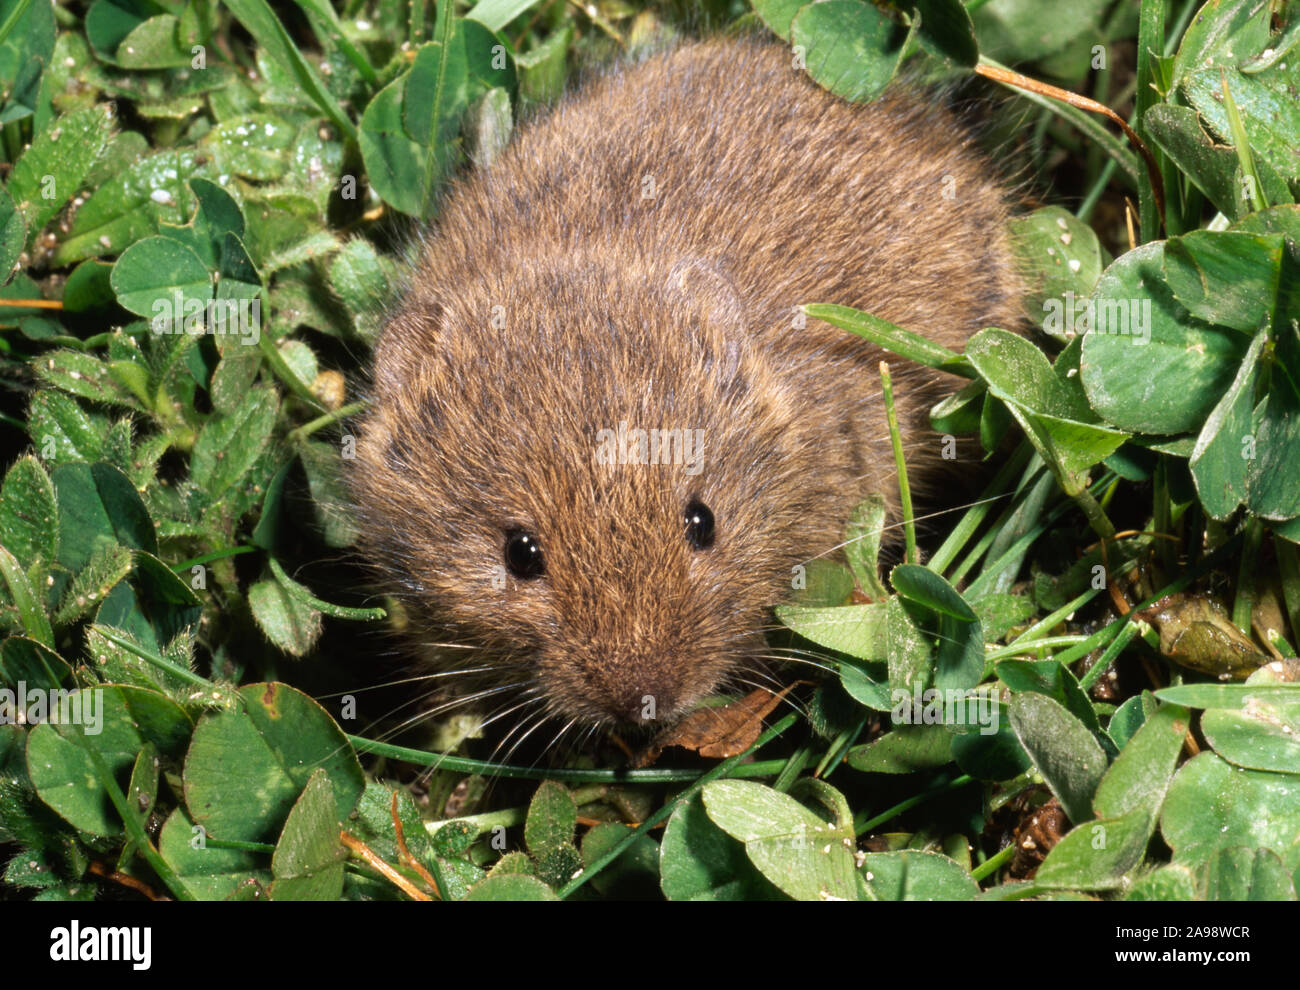 ORKNEY VOLE Microtus arvalis orcadensis smaller, lighter coloured form on Island of Westray, Orkney, Scotland. Long term isolation and evolution Stock Photo